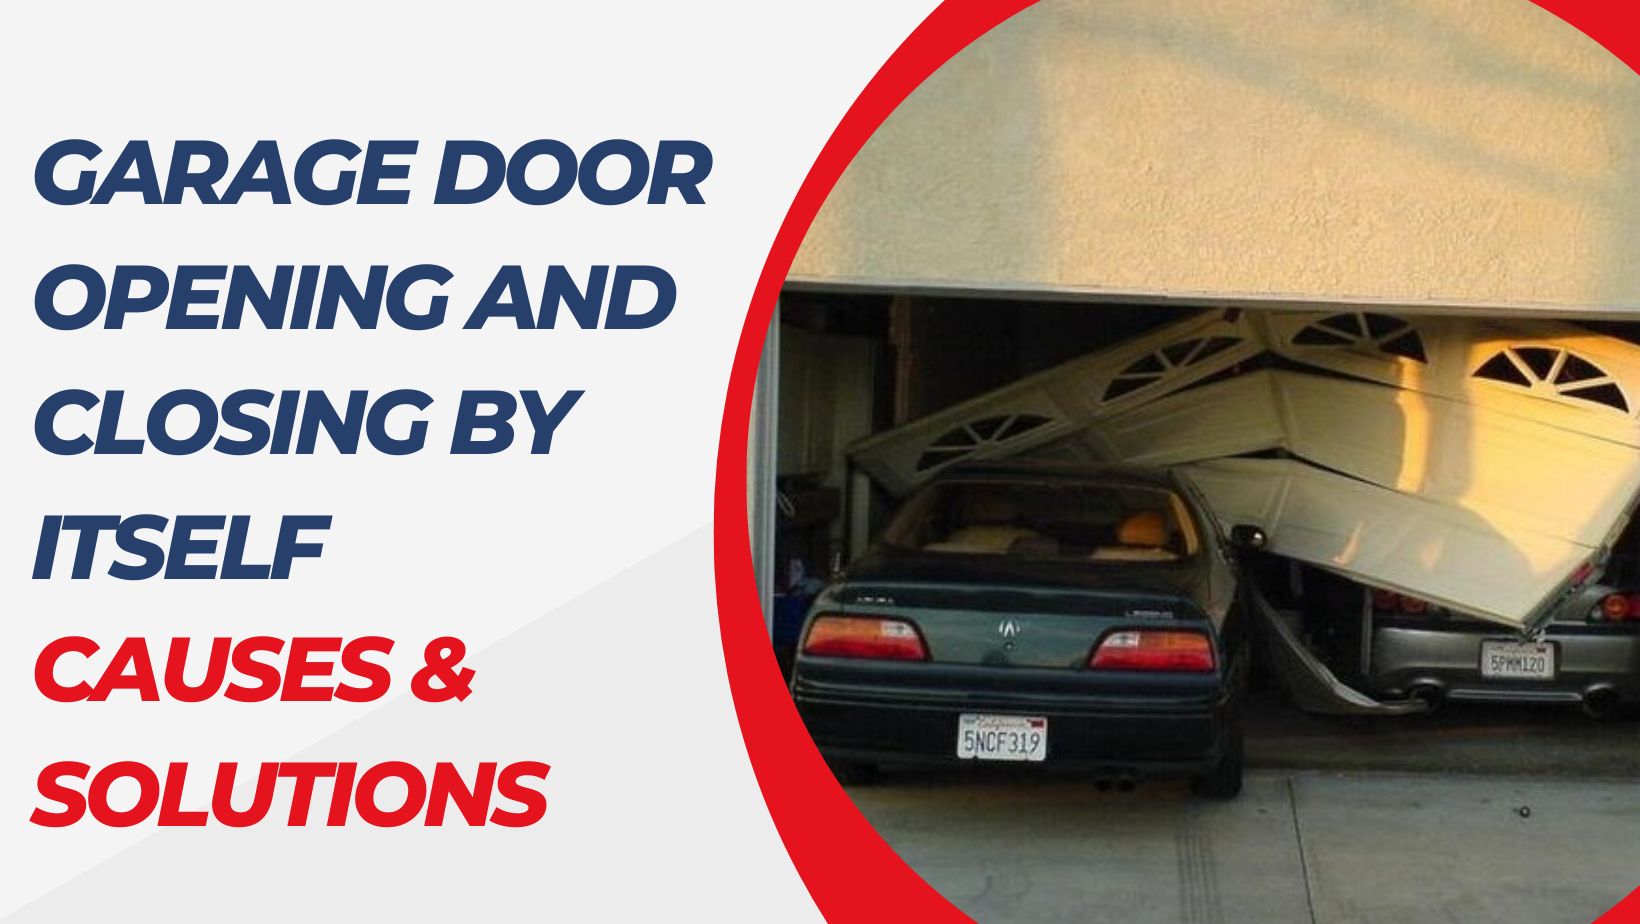 Garage Door Opening and Closing by Itself? Here are the Solutions ... - Garage Door Opening AnD Closing By Itself